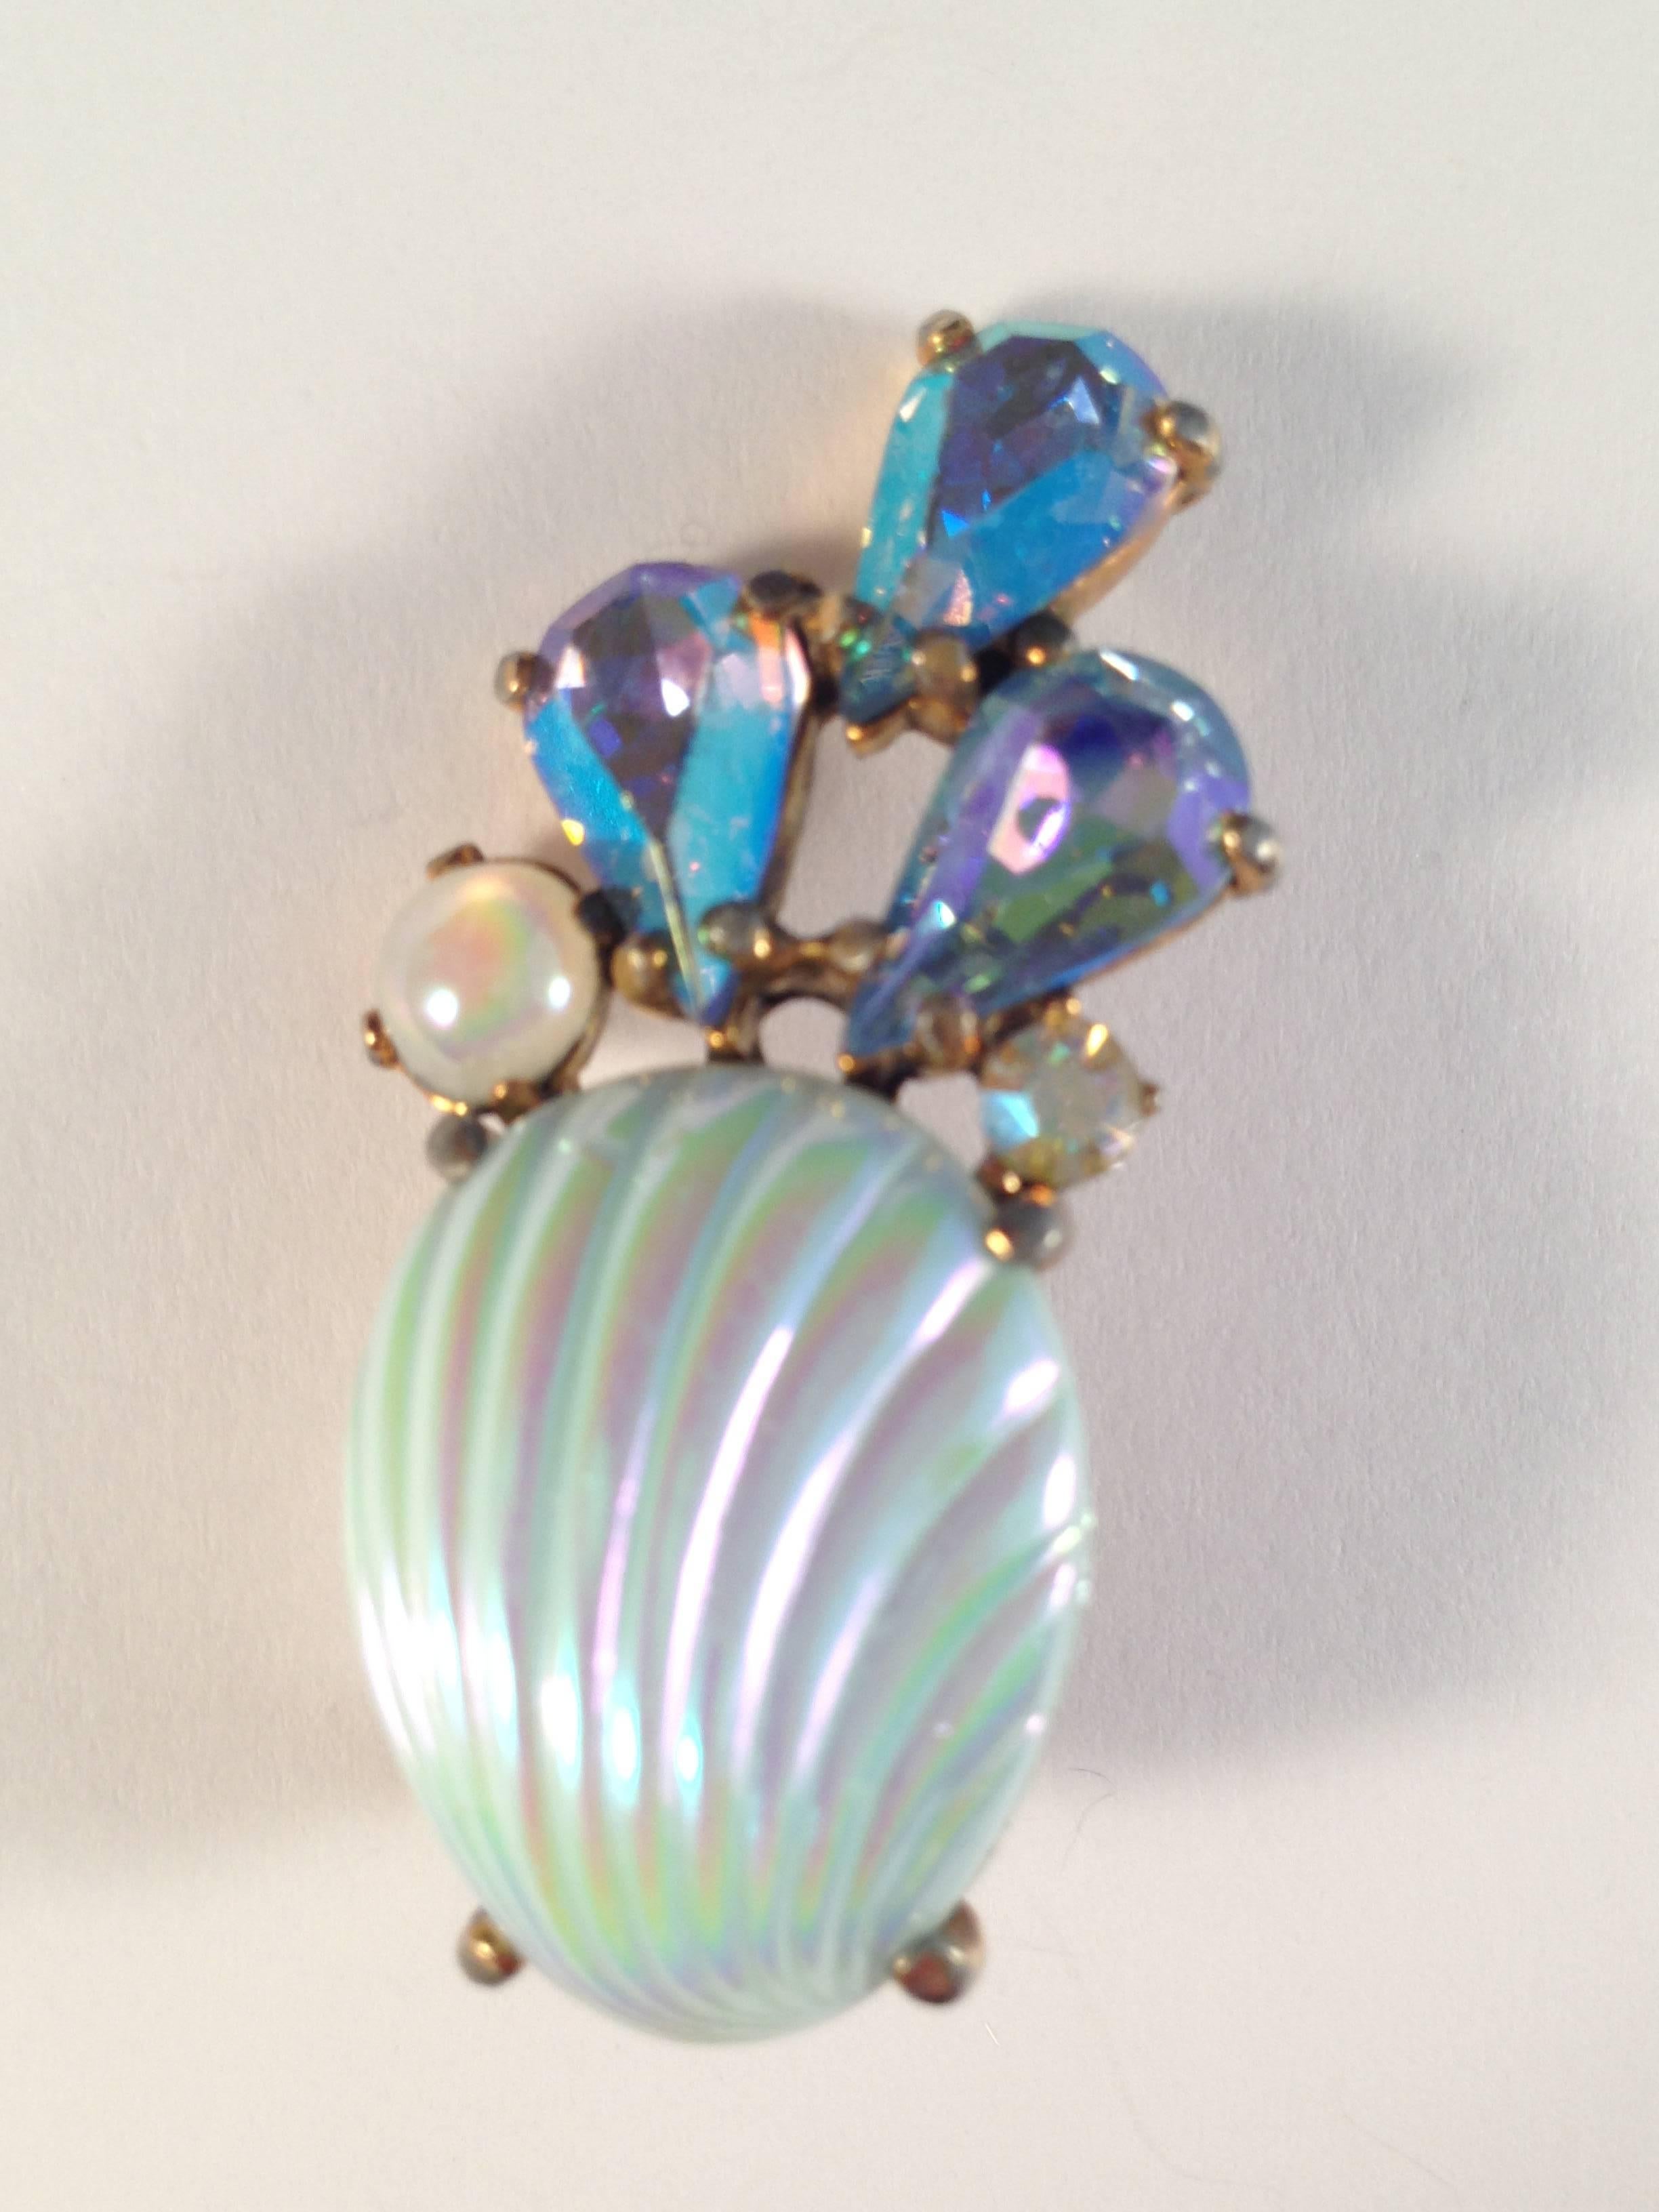 This is a pair of beautiful 1950s Schiaparelli clip-on shell earrings. They feature a faux iridescent blue shell, faux pearl and iridescent blue rhinestones. They are marked "Schiaparelli" on the back of the clips. They are in very good